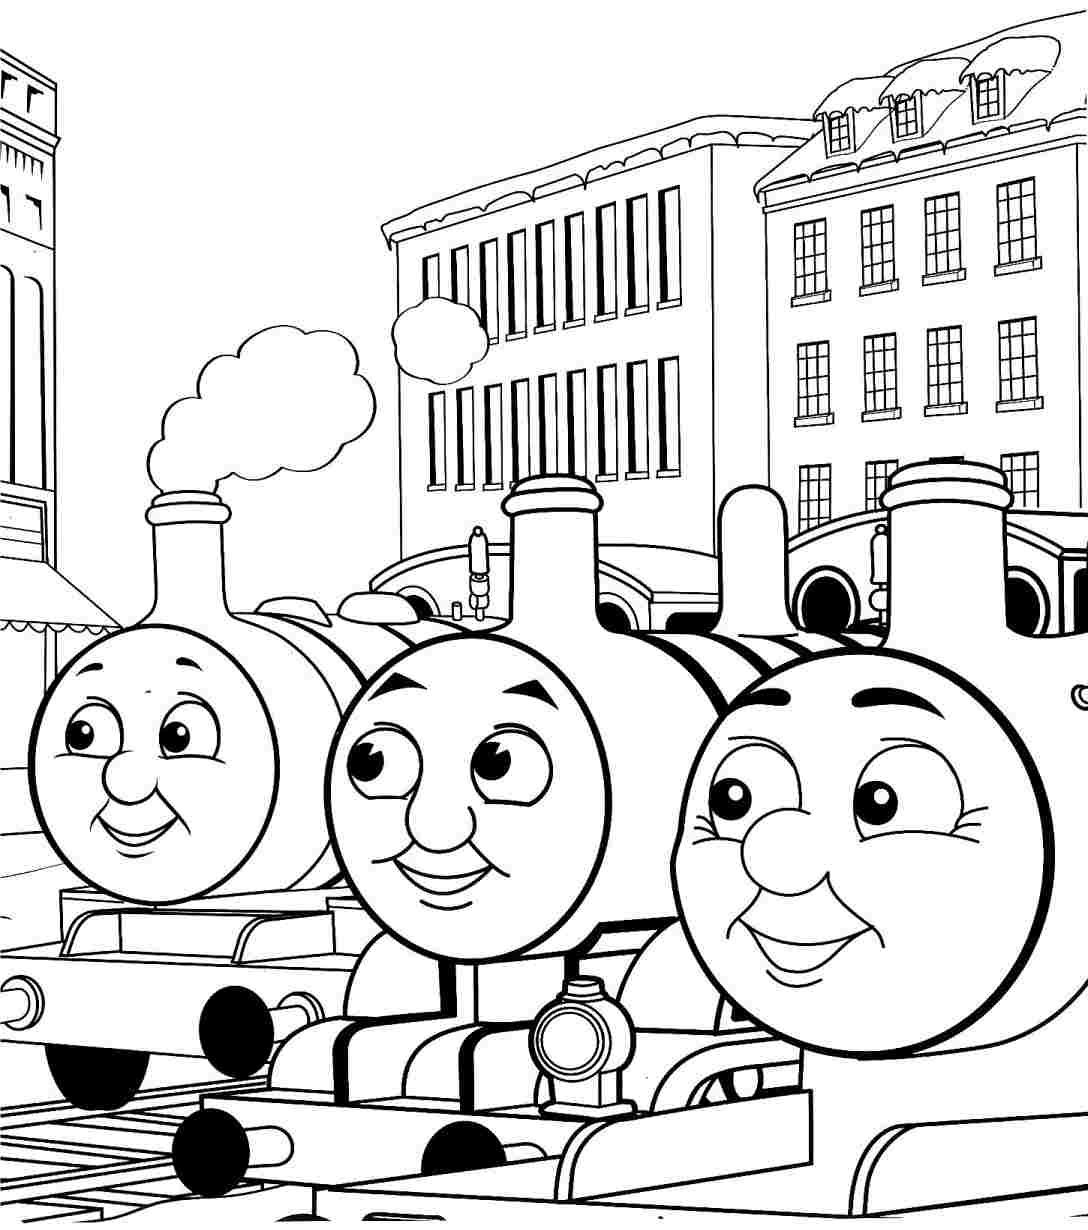 Thomas The Train Coloring Pages Pdf at